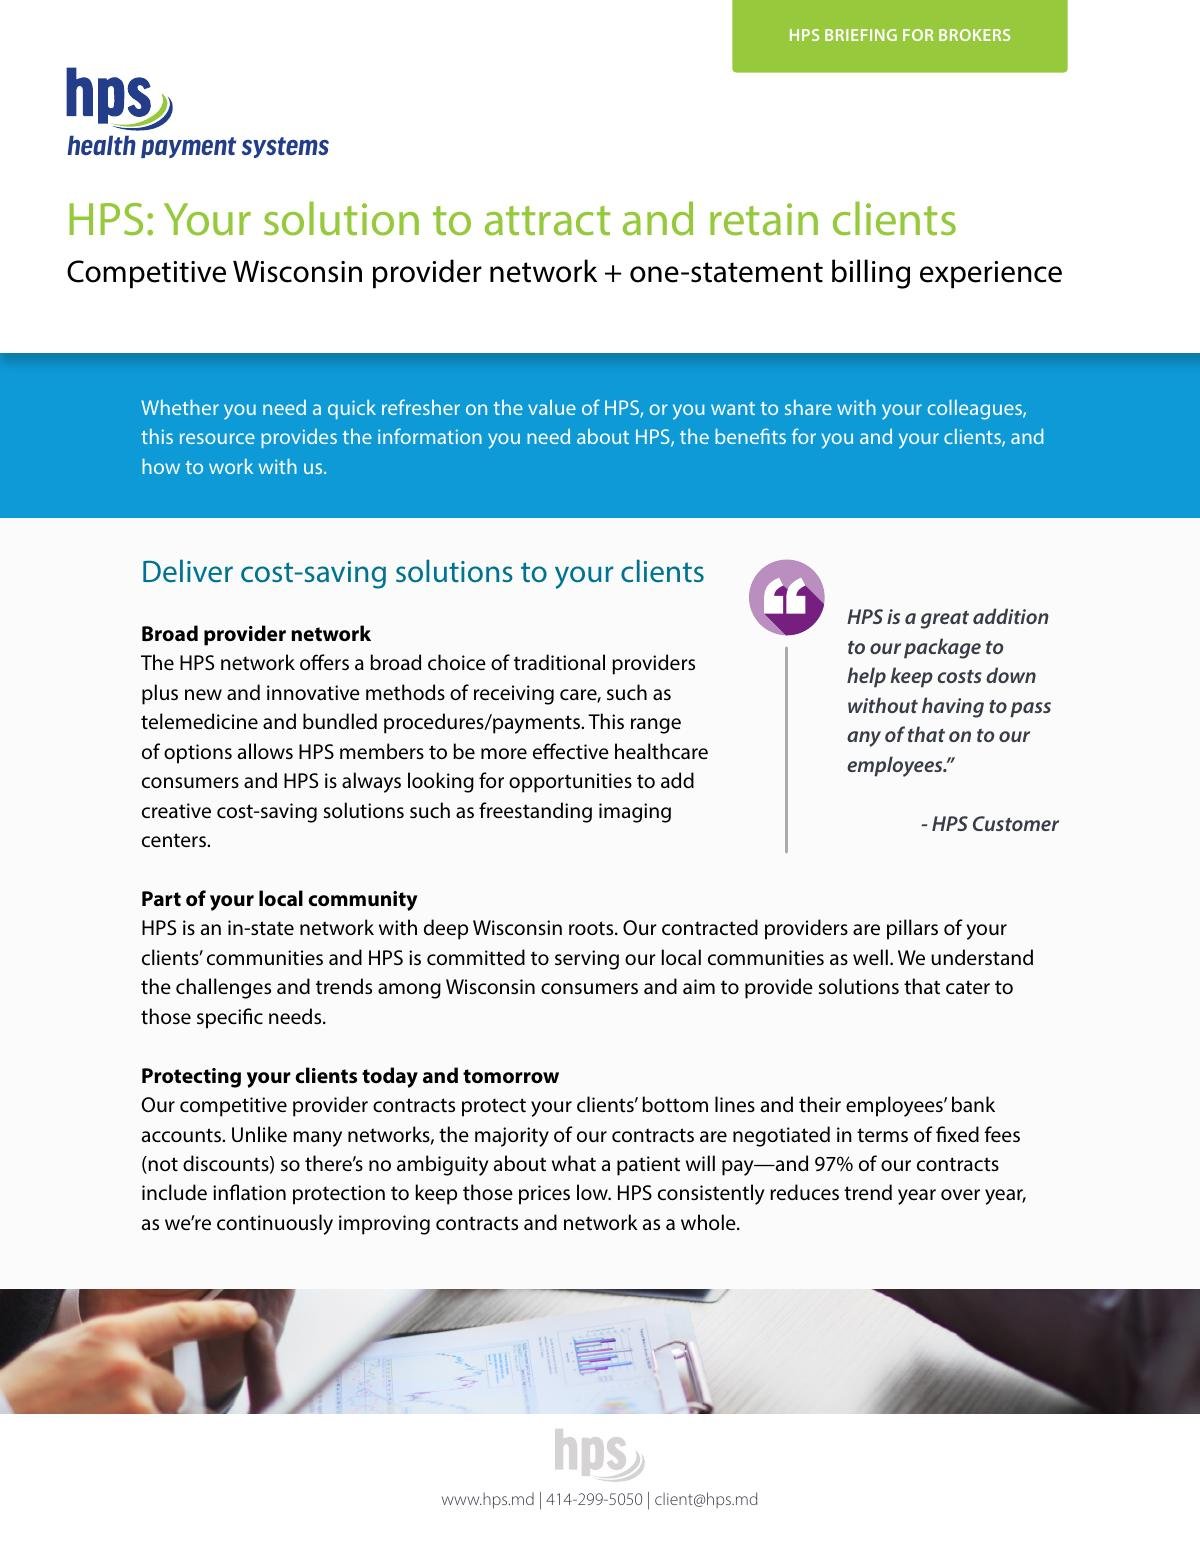 HPS: Your Solution to Attract and Retain Clients